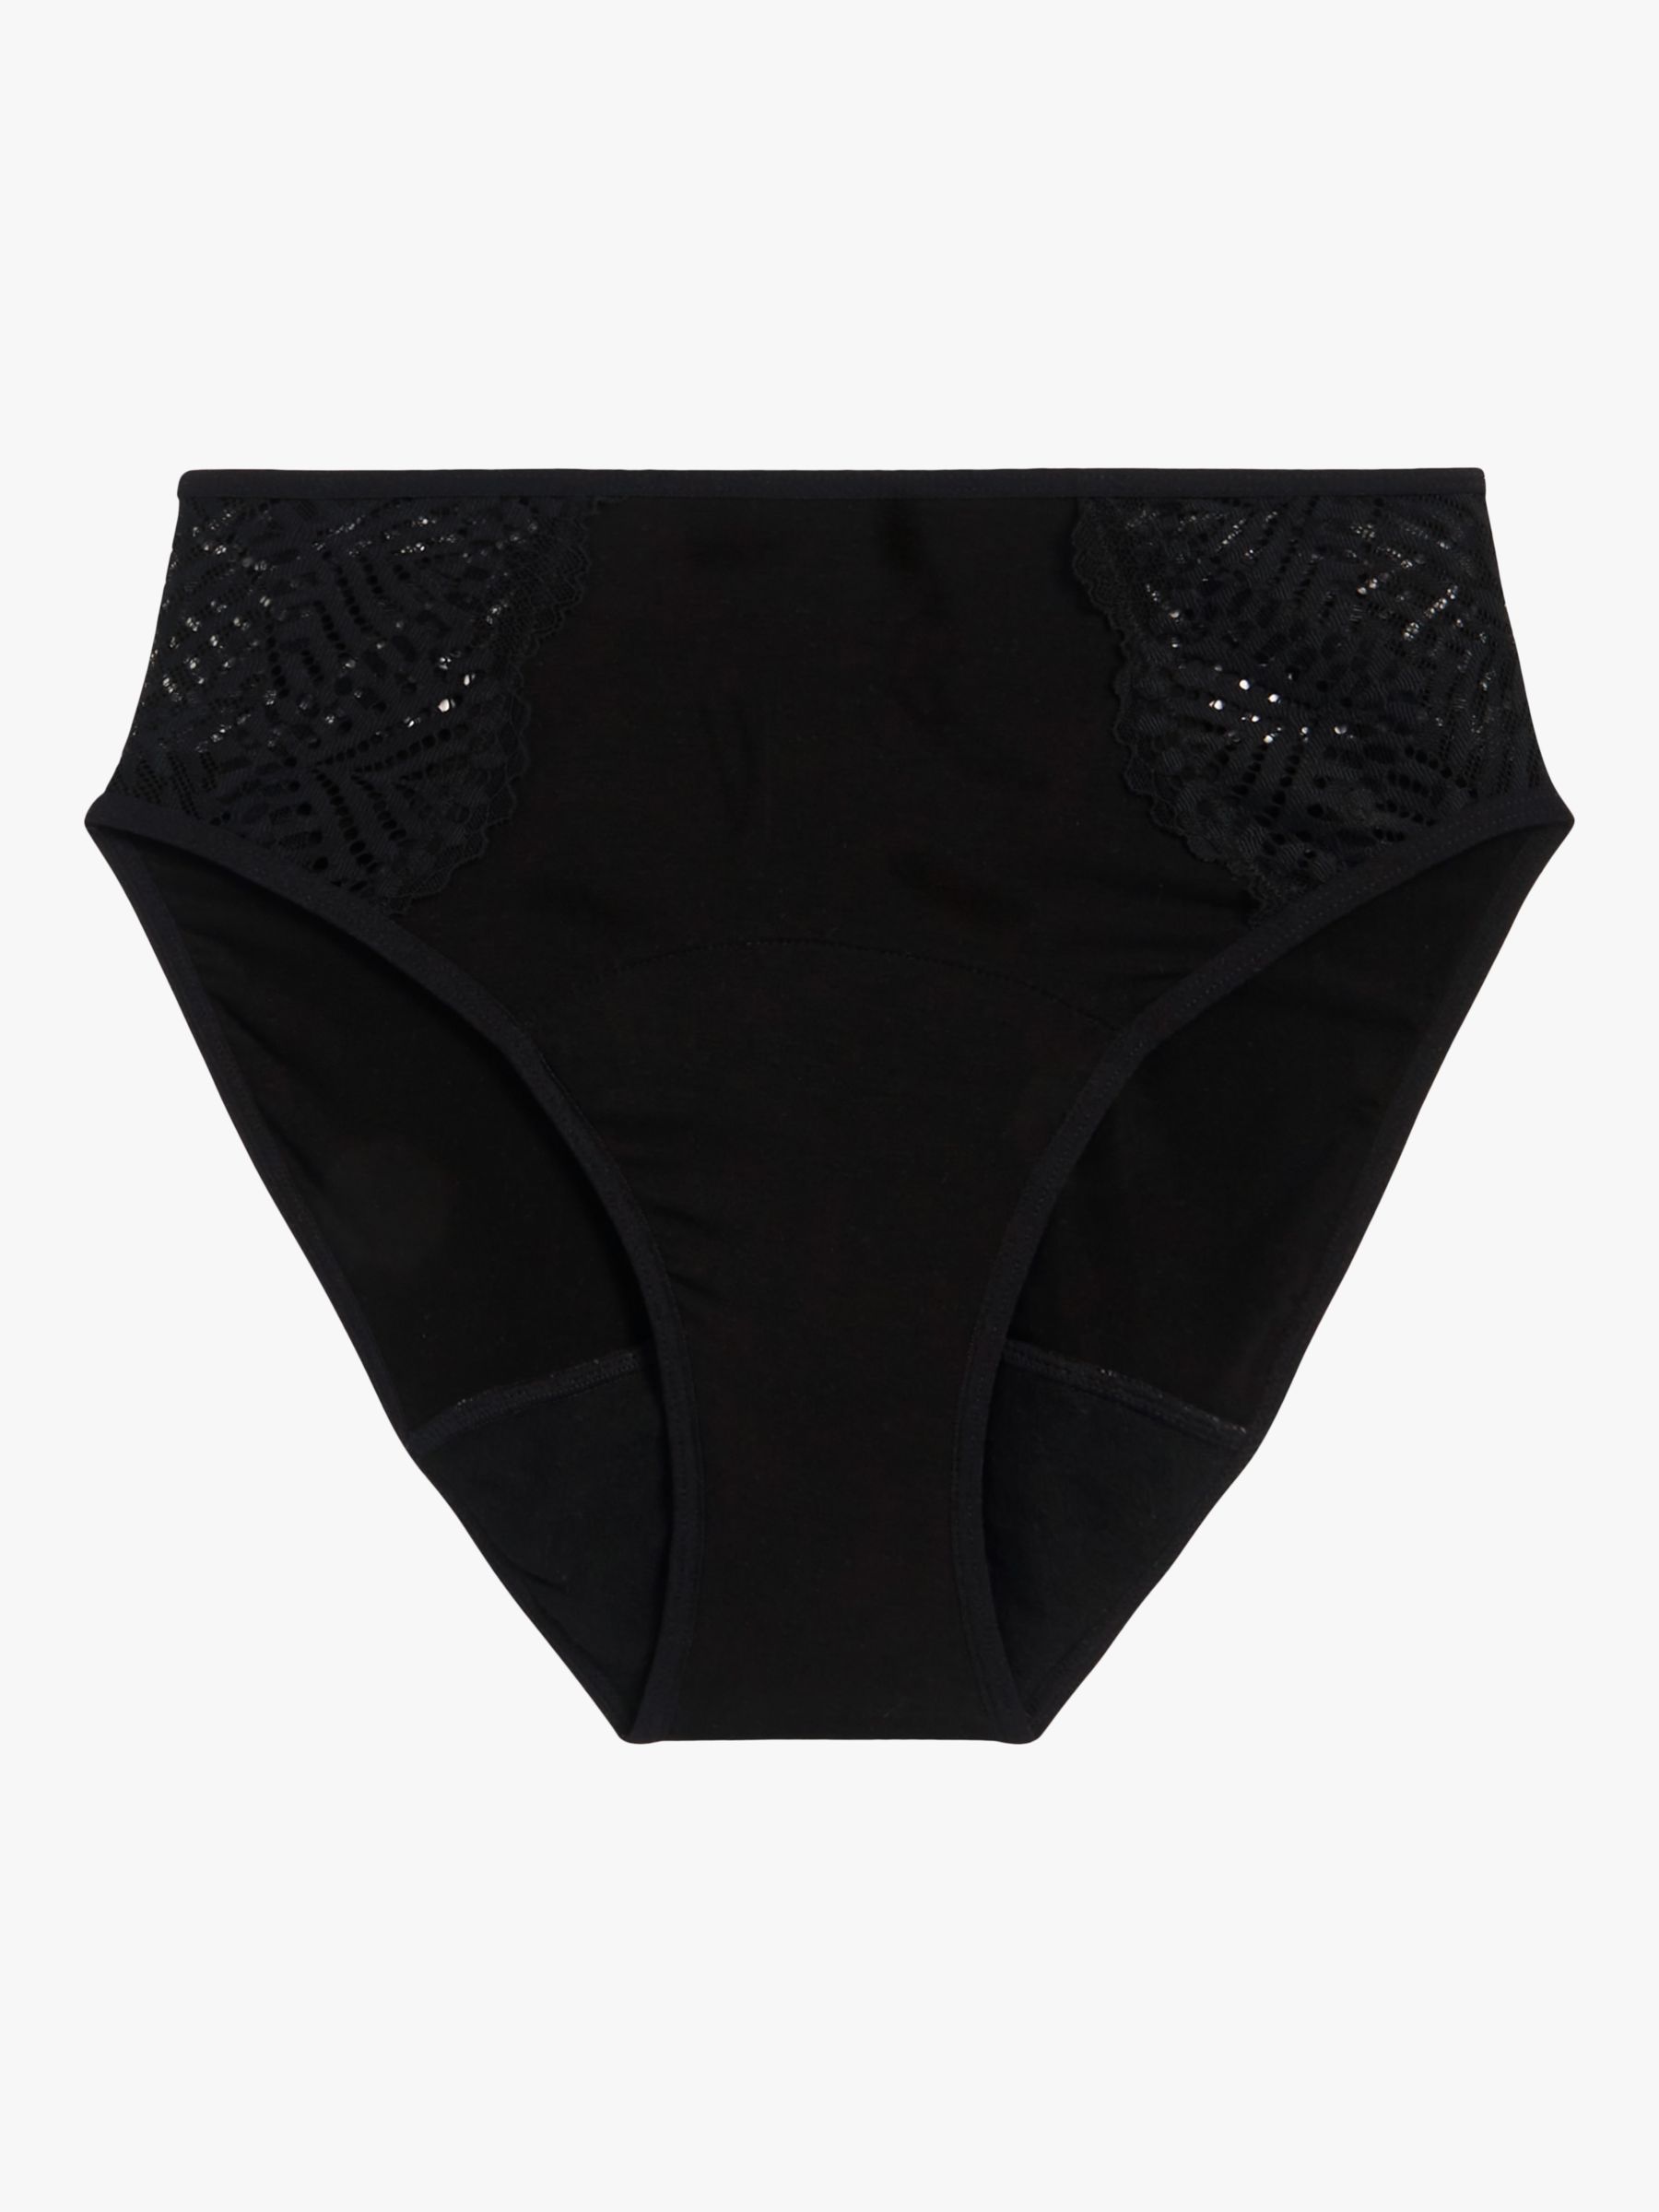 Buy Modibodi Sensual French Cut Moderate to Heavy Absorbency Knickers Online at johnlewis.com